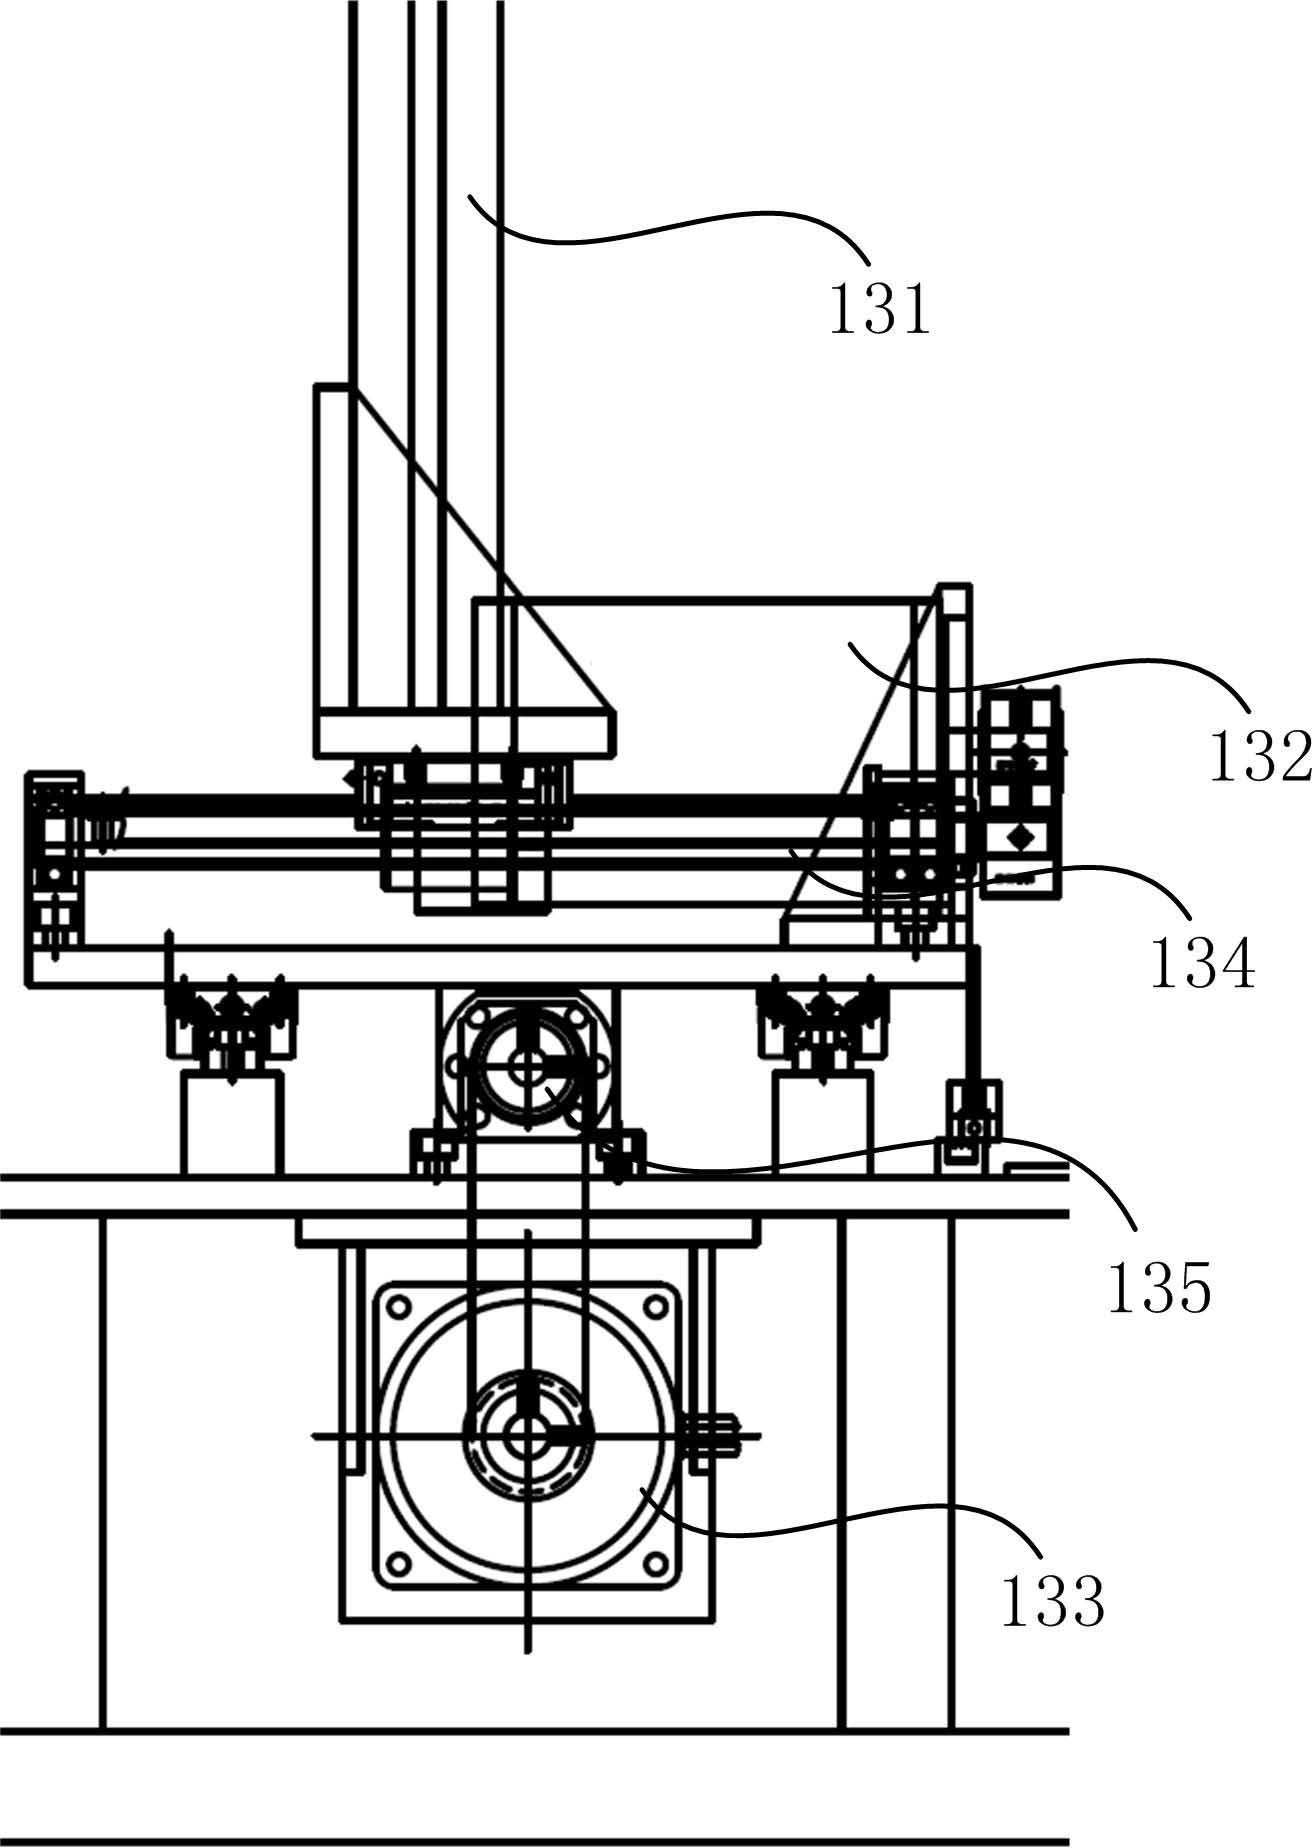 Device and method for regulating electrical parameters